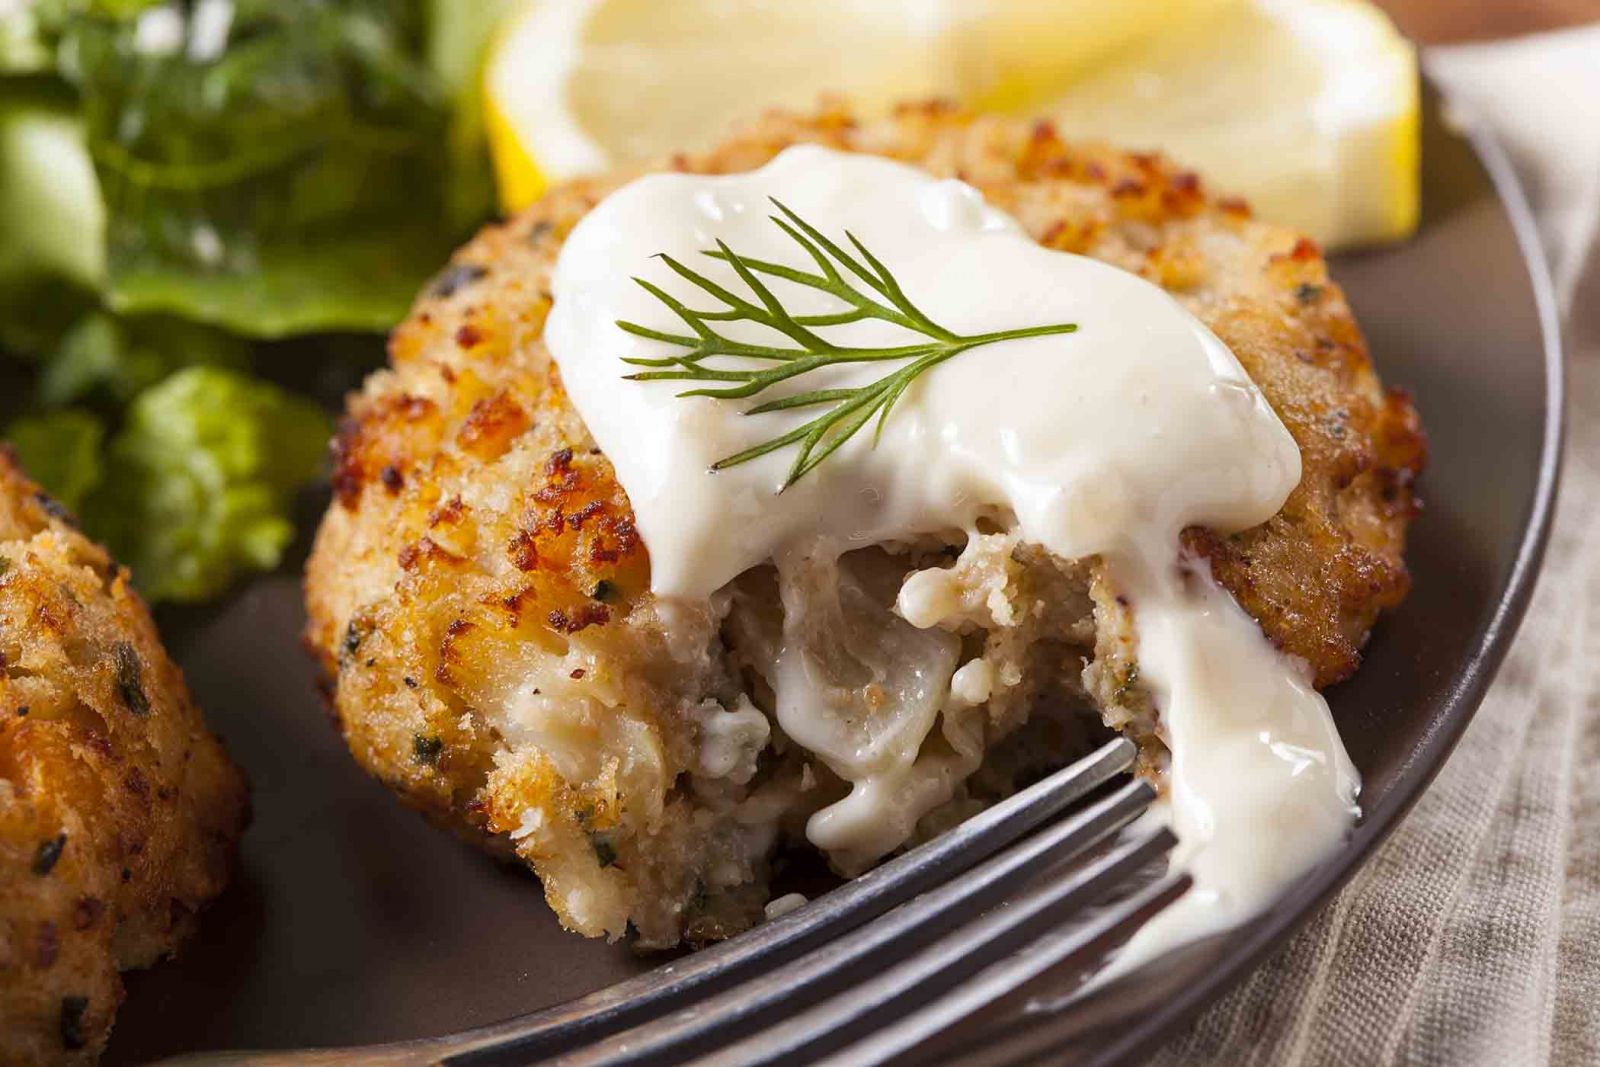 Lump crab meat cakes and fresh greens